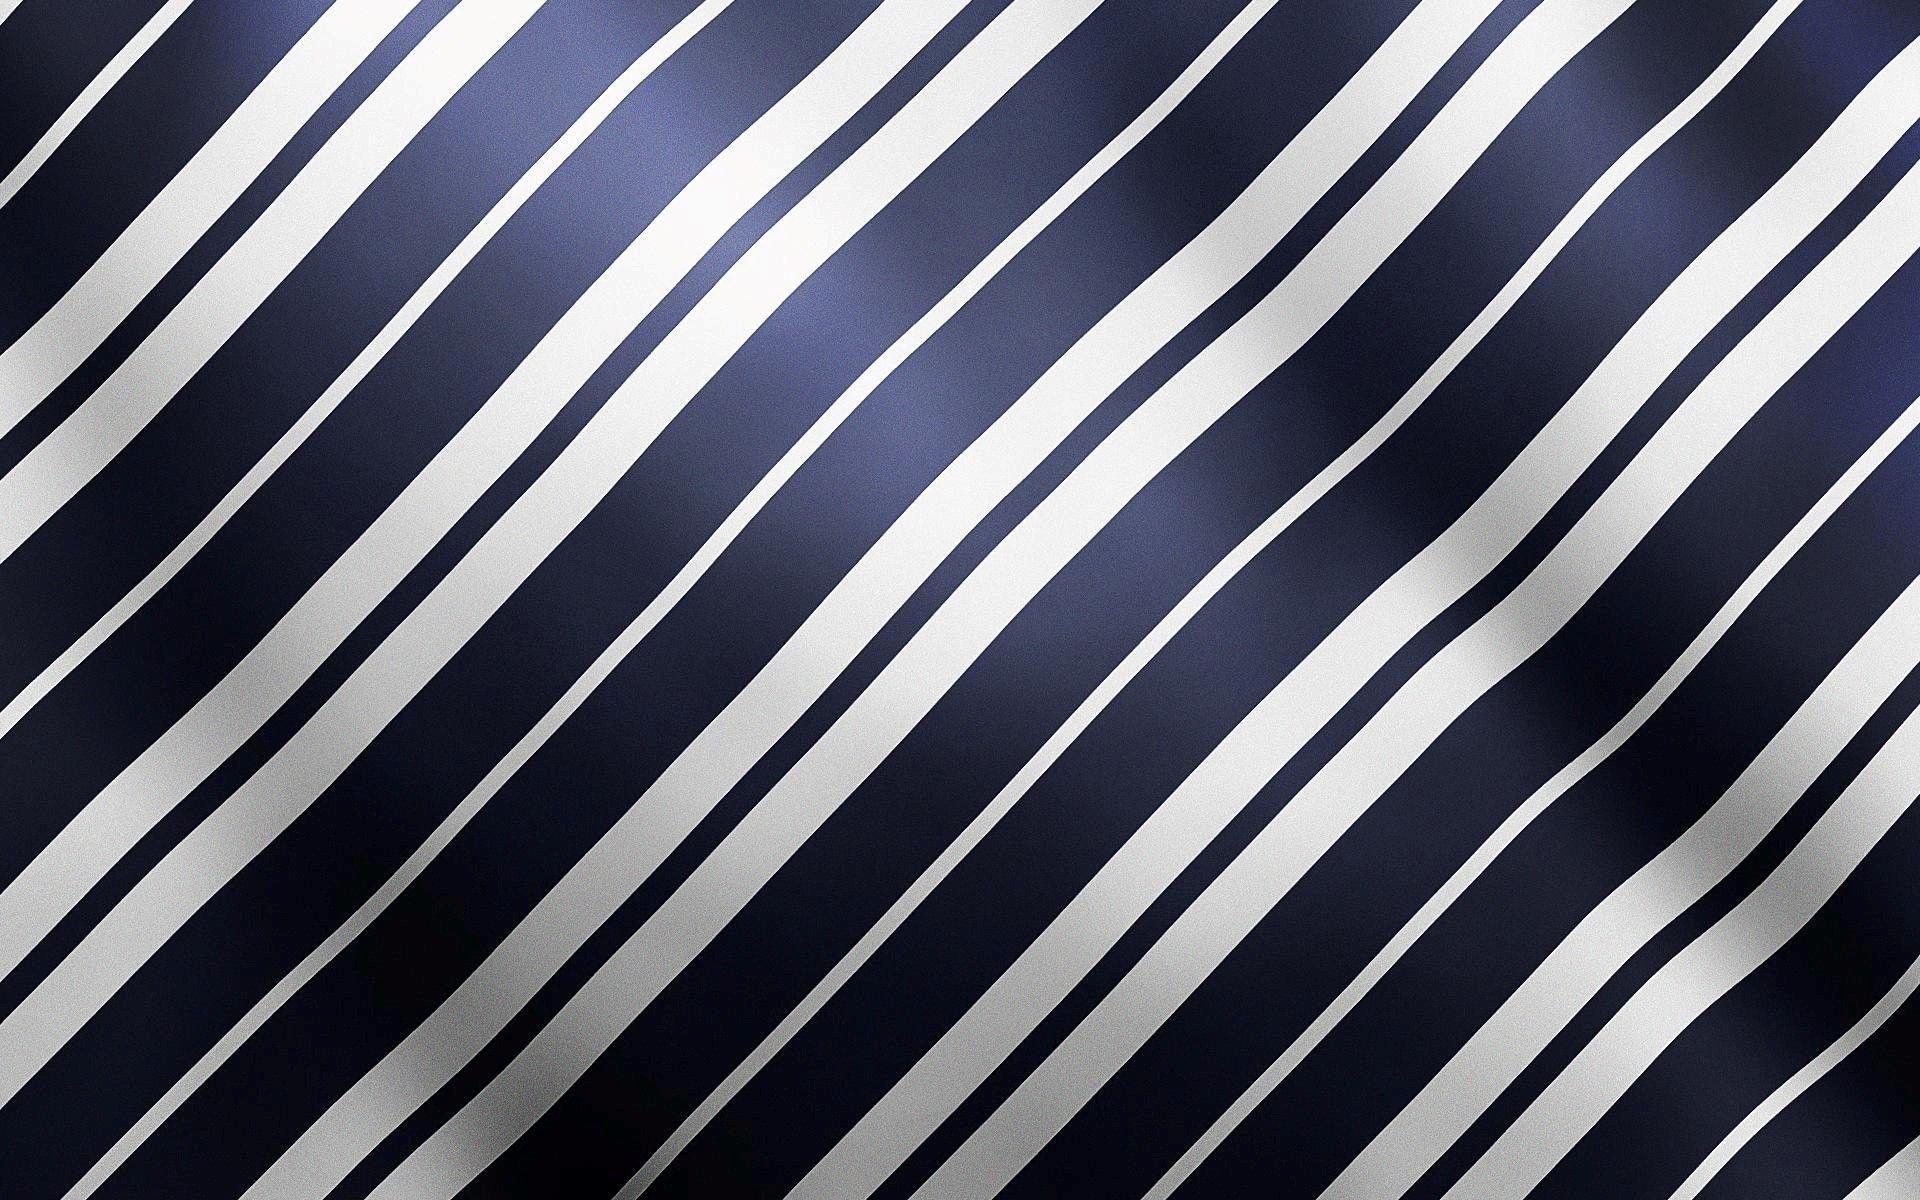 Black and White Lines Wallpapers - Top Free Black and White Lines